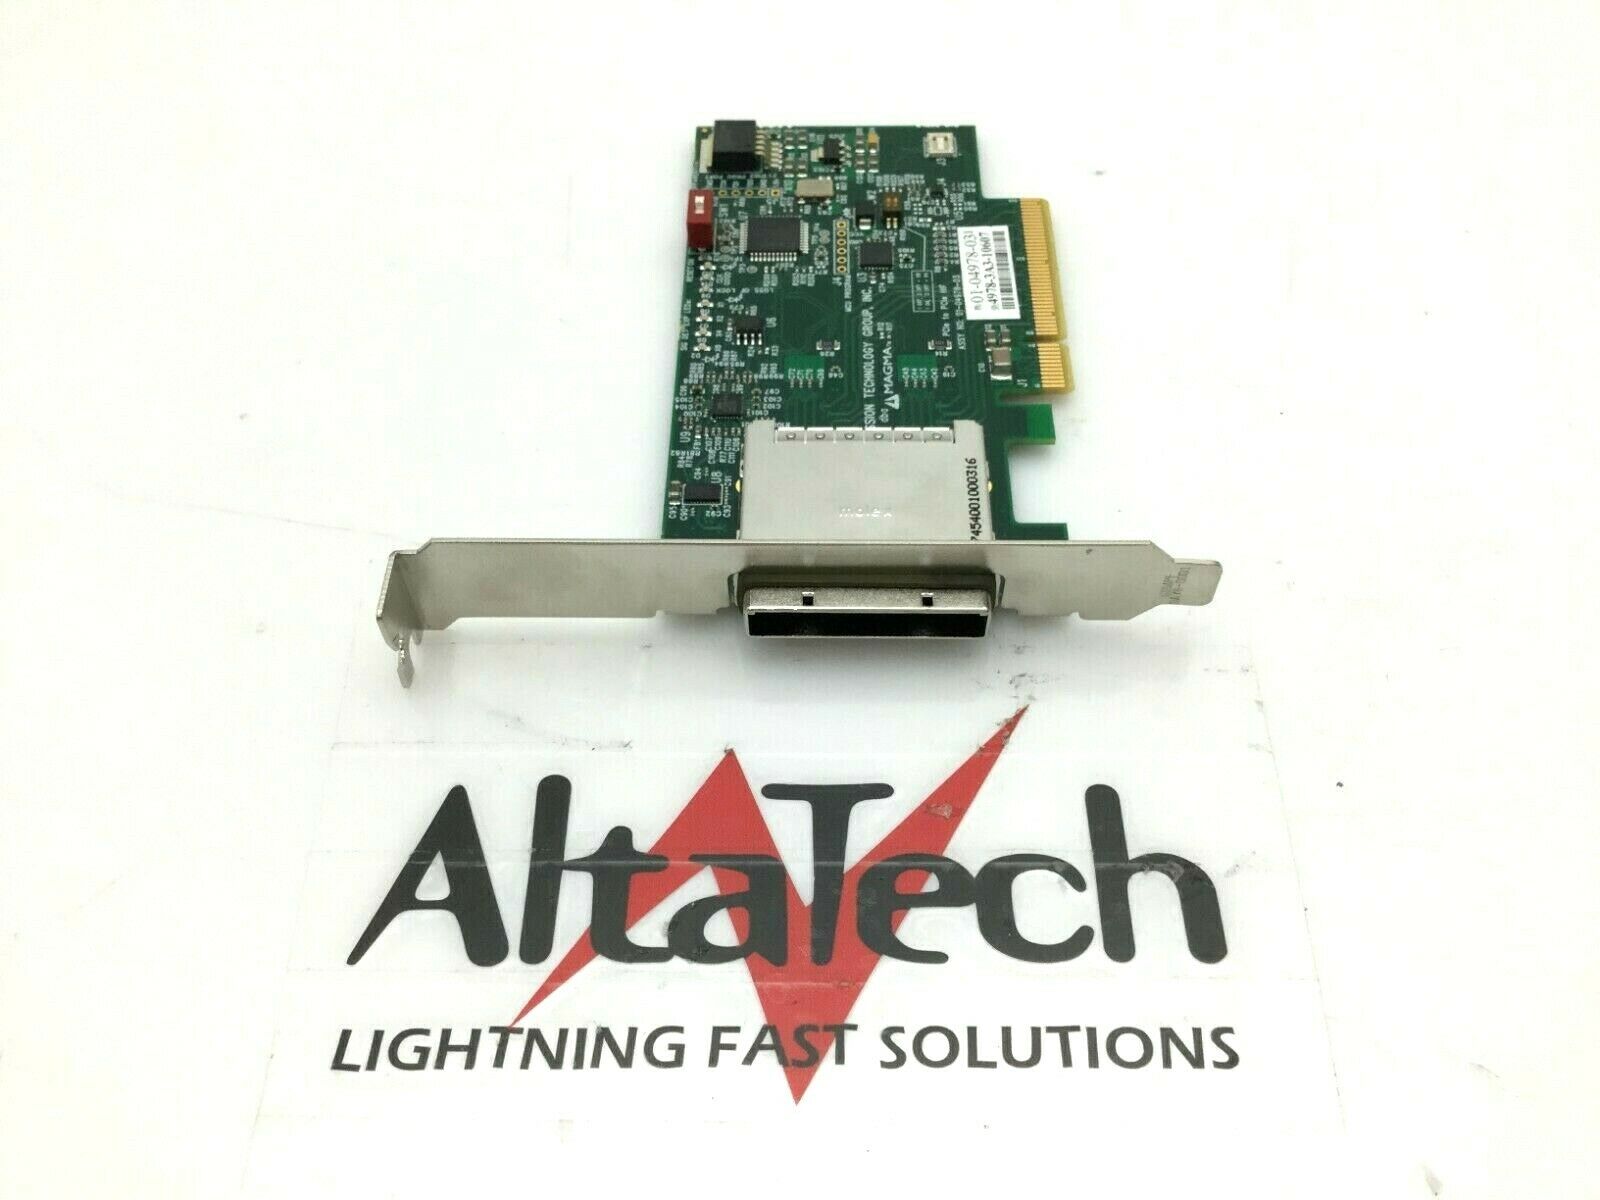 OEM 03-04978-03 Full Height PCI-e x8 Gen 2 SCSI Expansion Link Card, Used